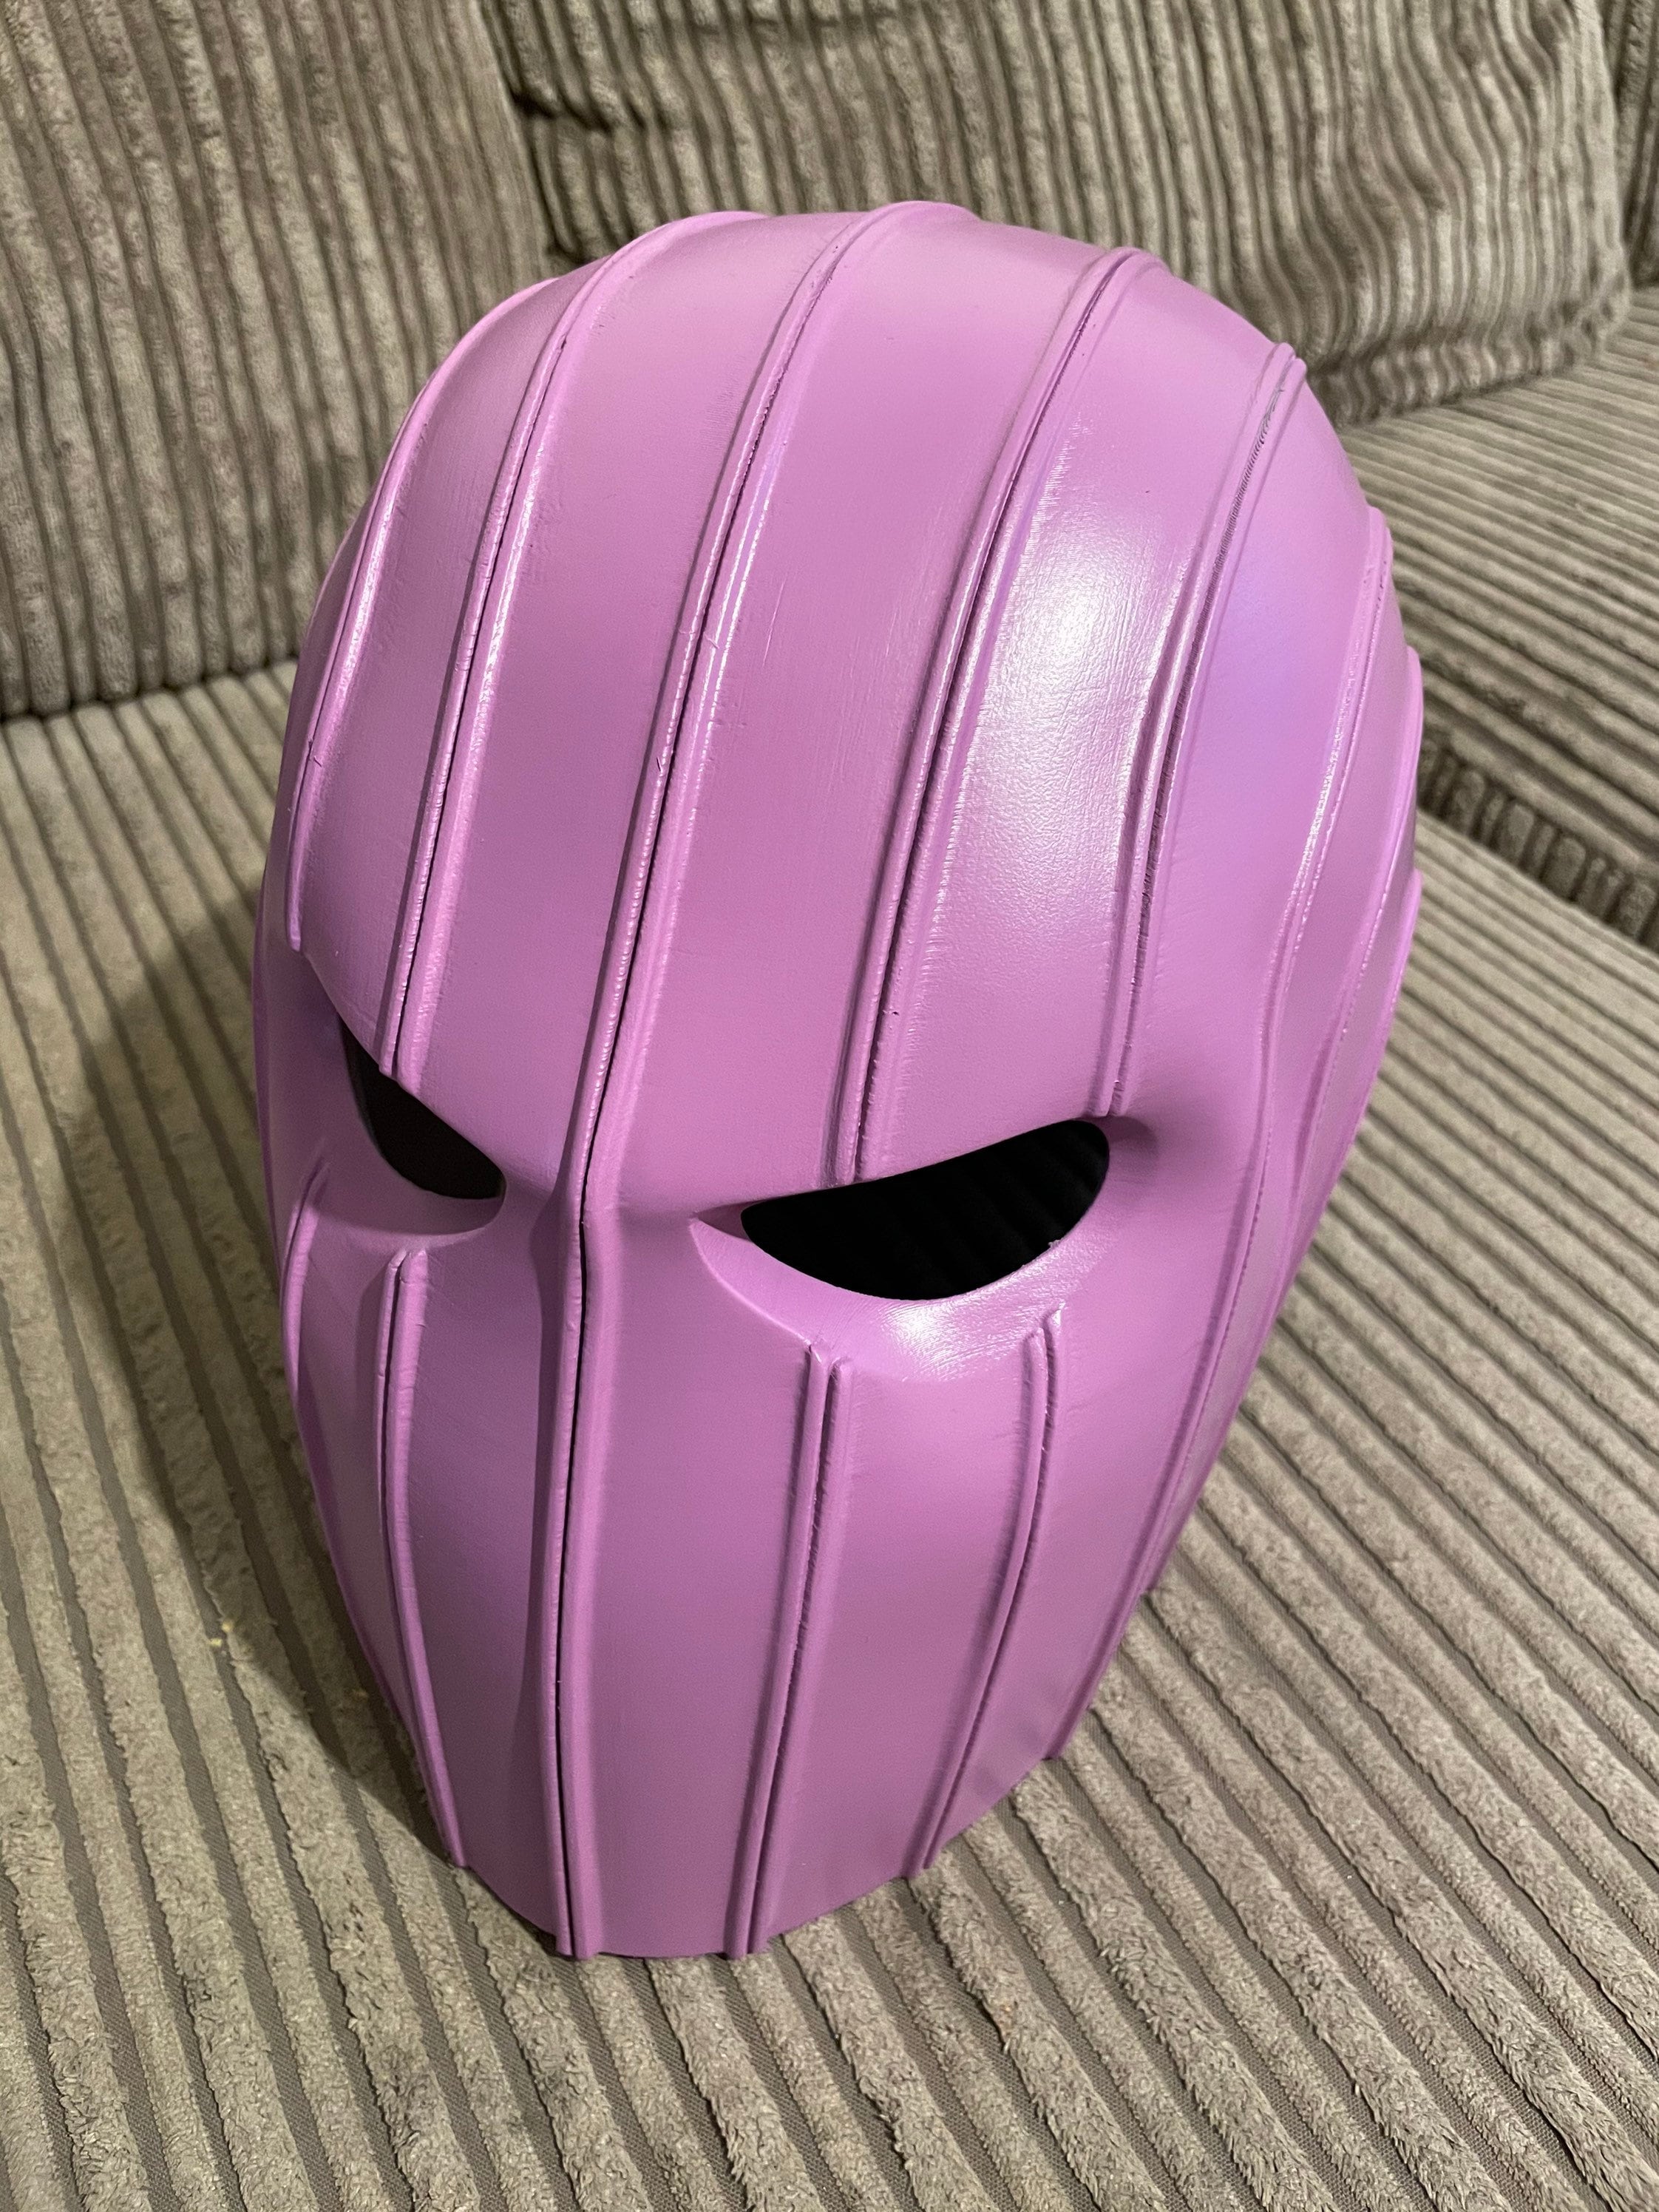 Baron Zemo Mask From the Falcon and the Winter Soldier - Etsy